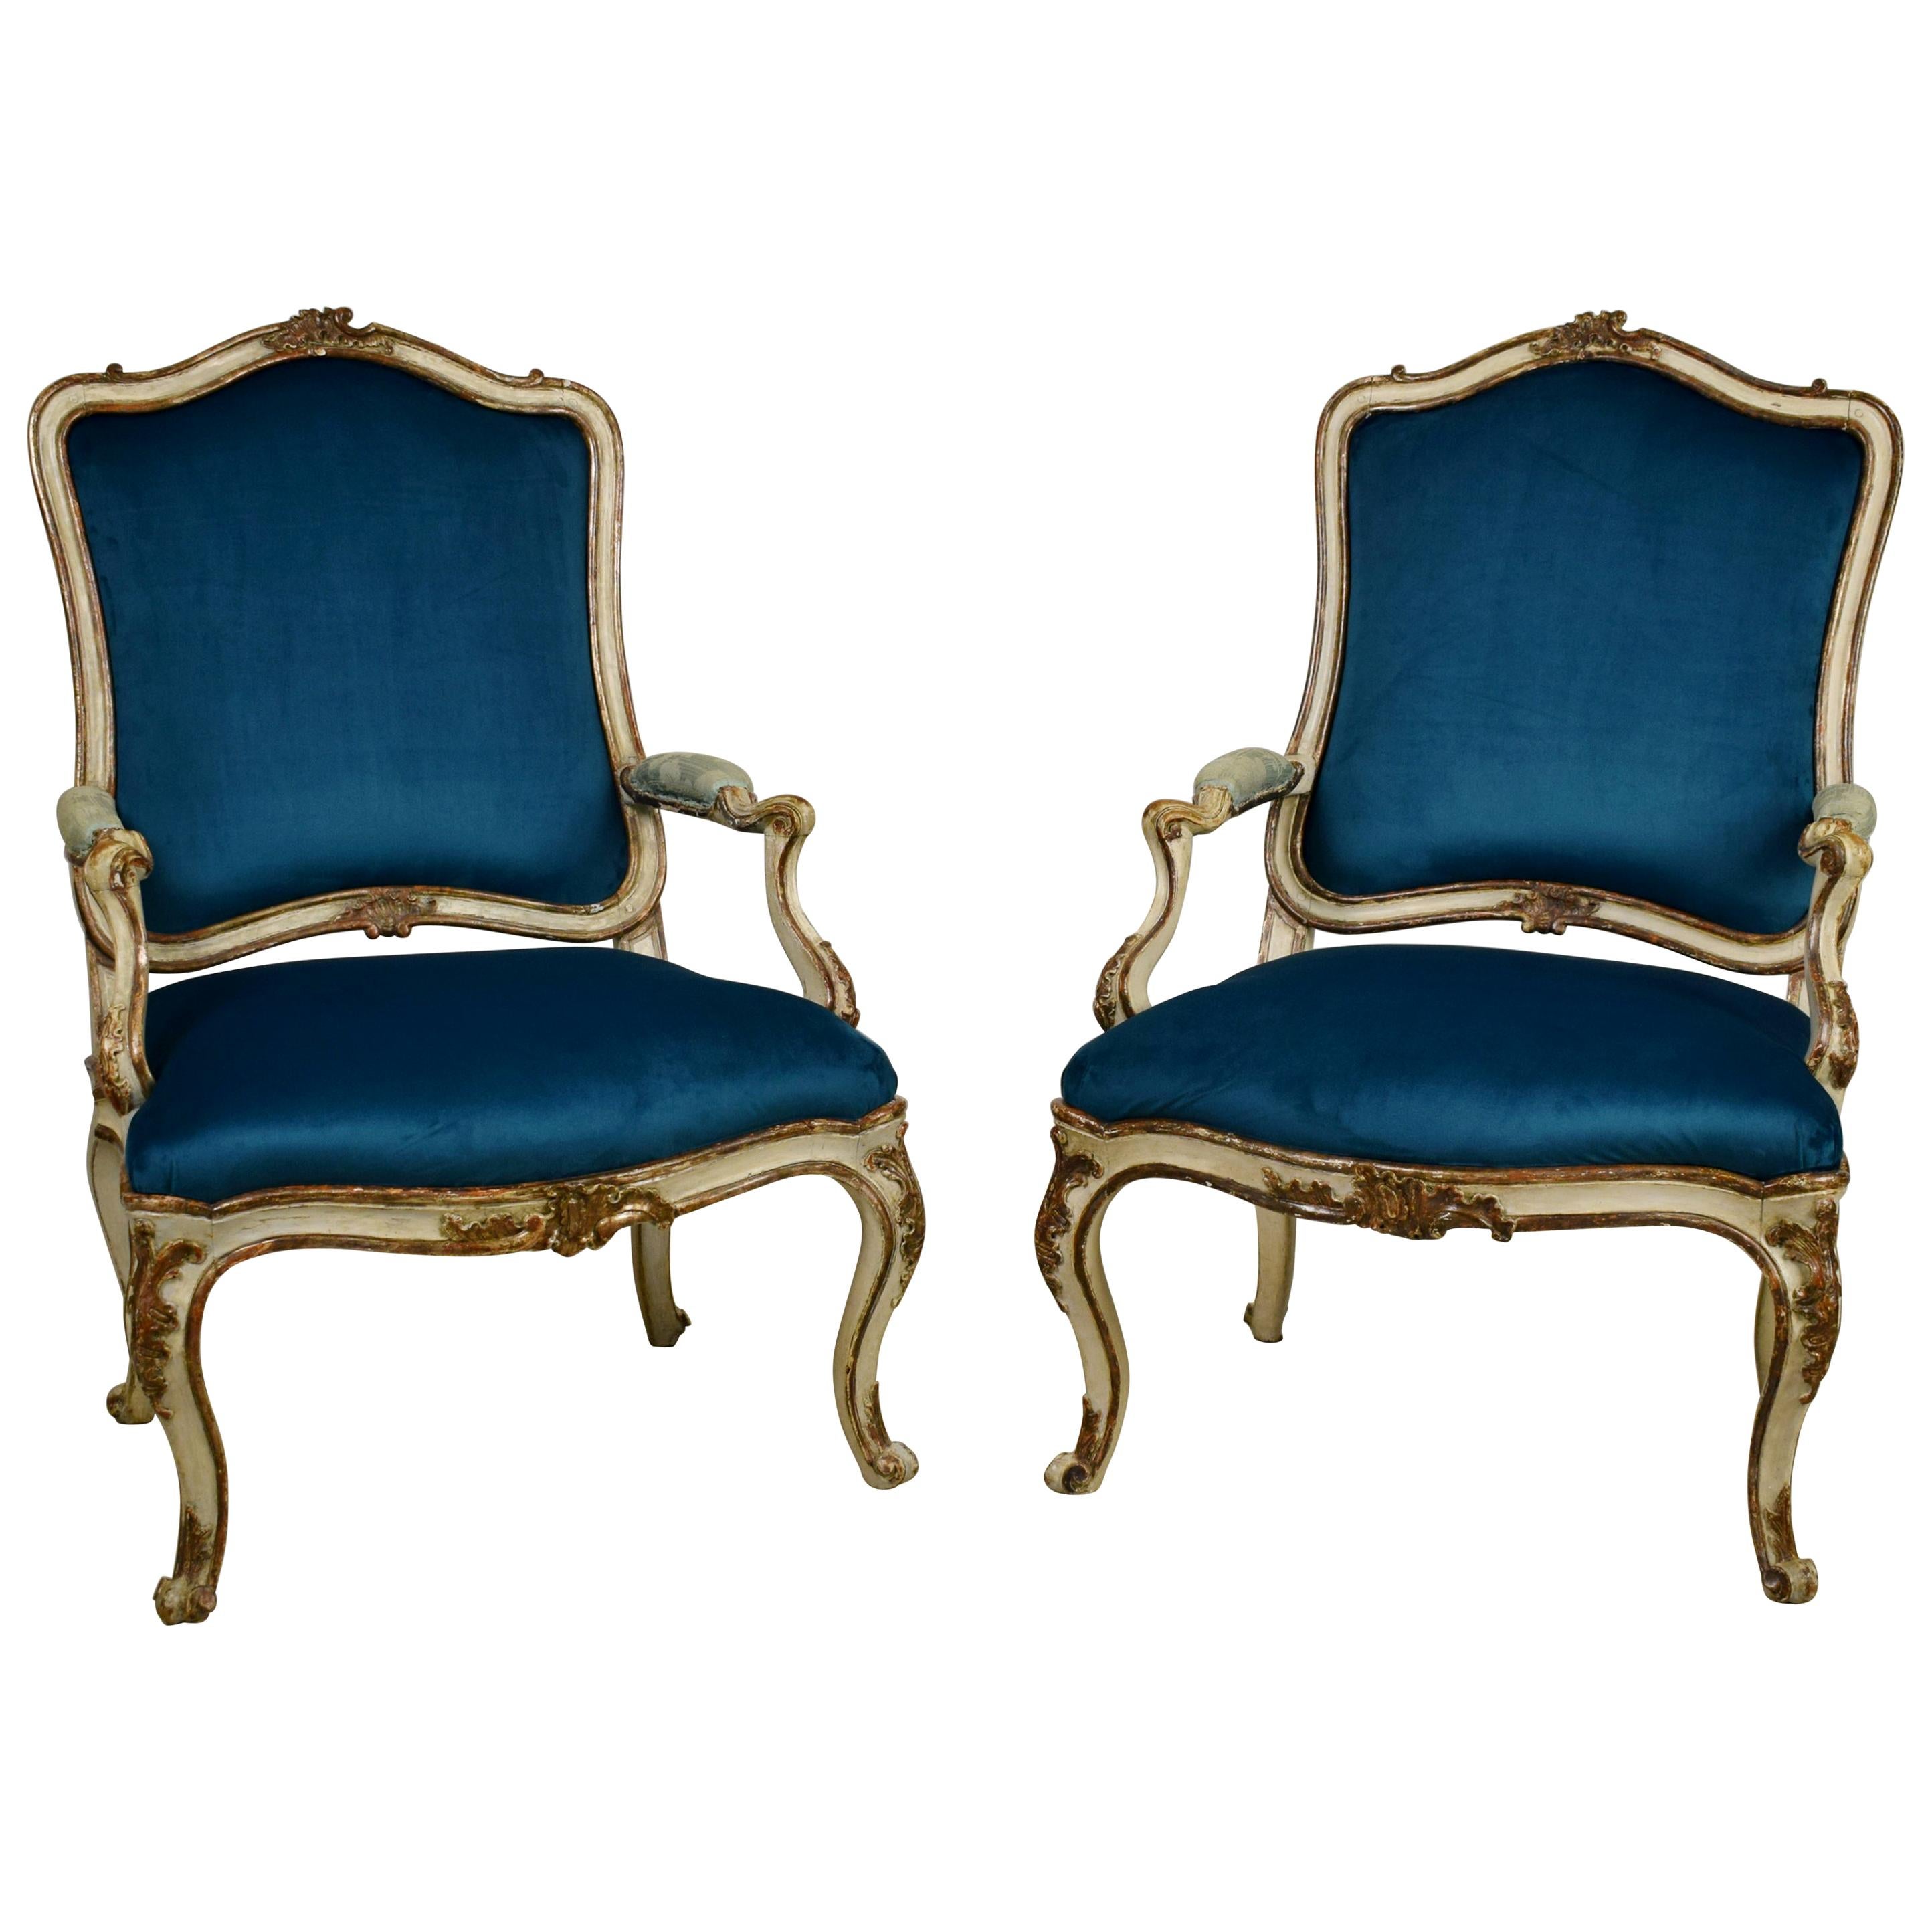 18th Century, Pair of Italian Lacquered Silver Carved Wood Armchairs